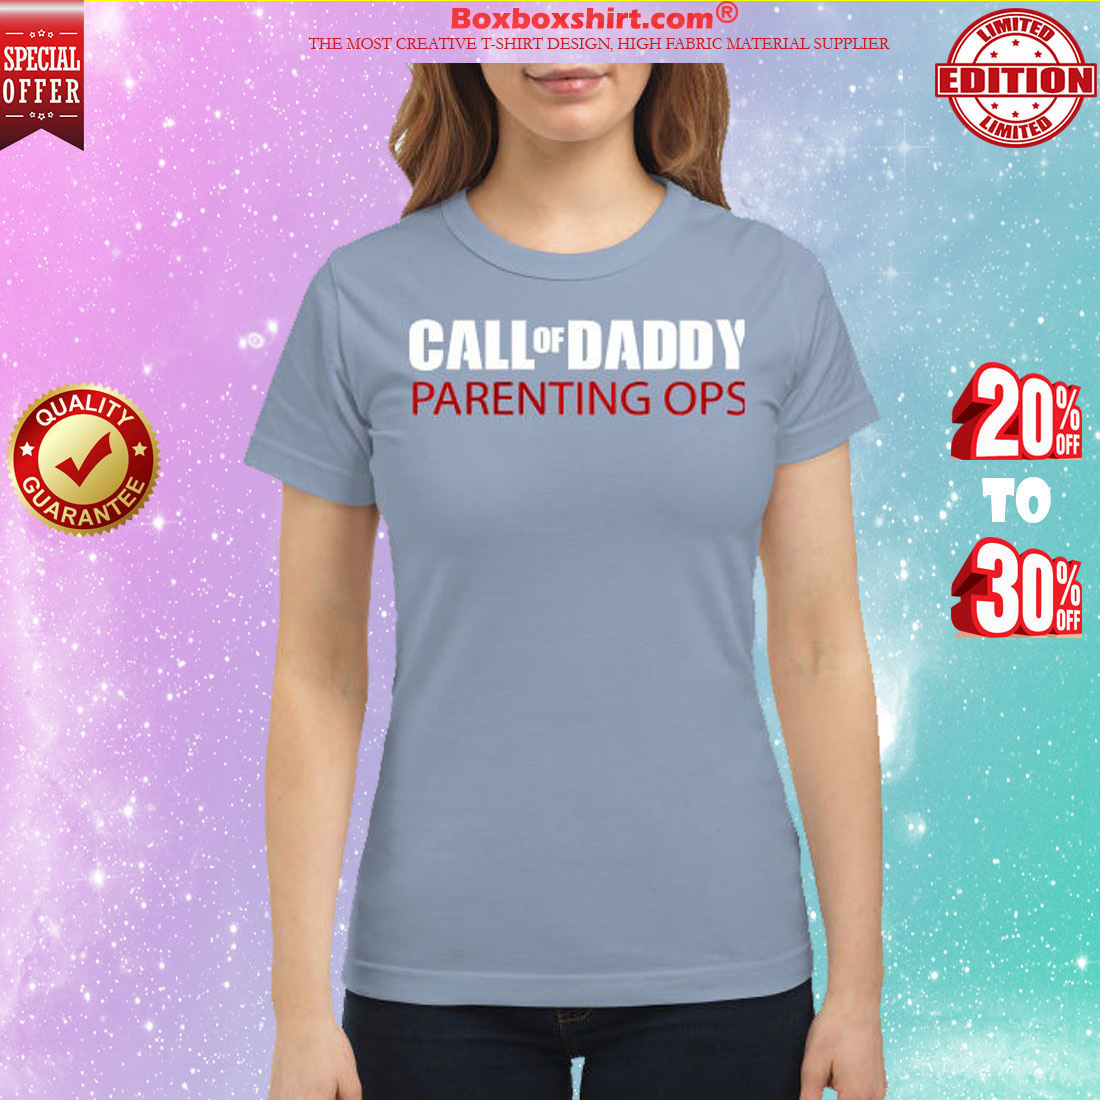 Call of daddy parenting ops classic shirt